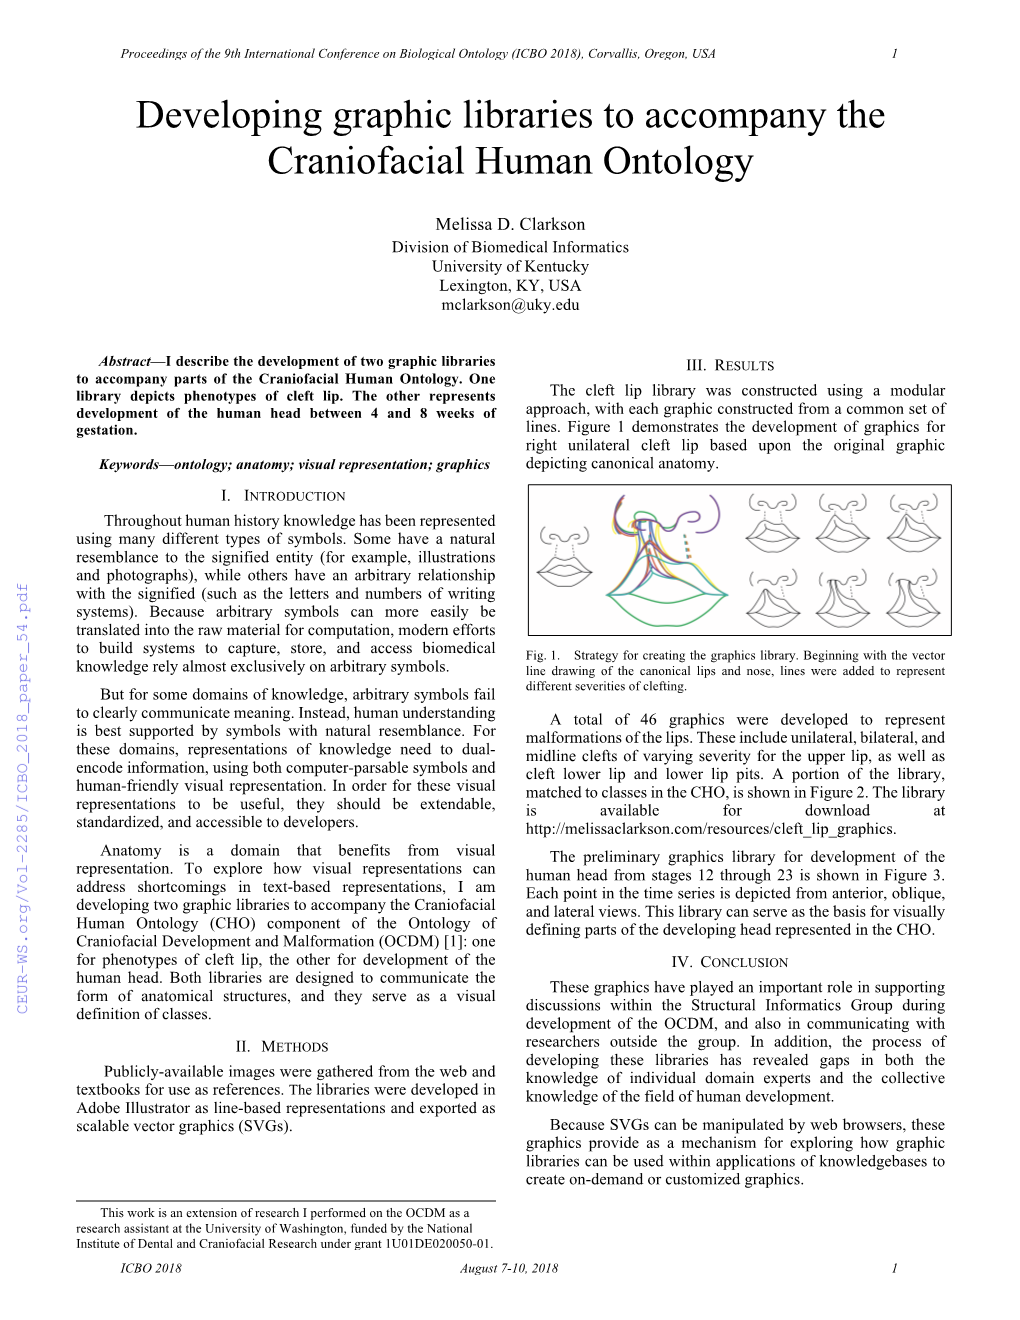 Developing Graphic Libraries to Accompany the Craniofacial Human Ontology